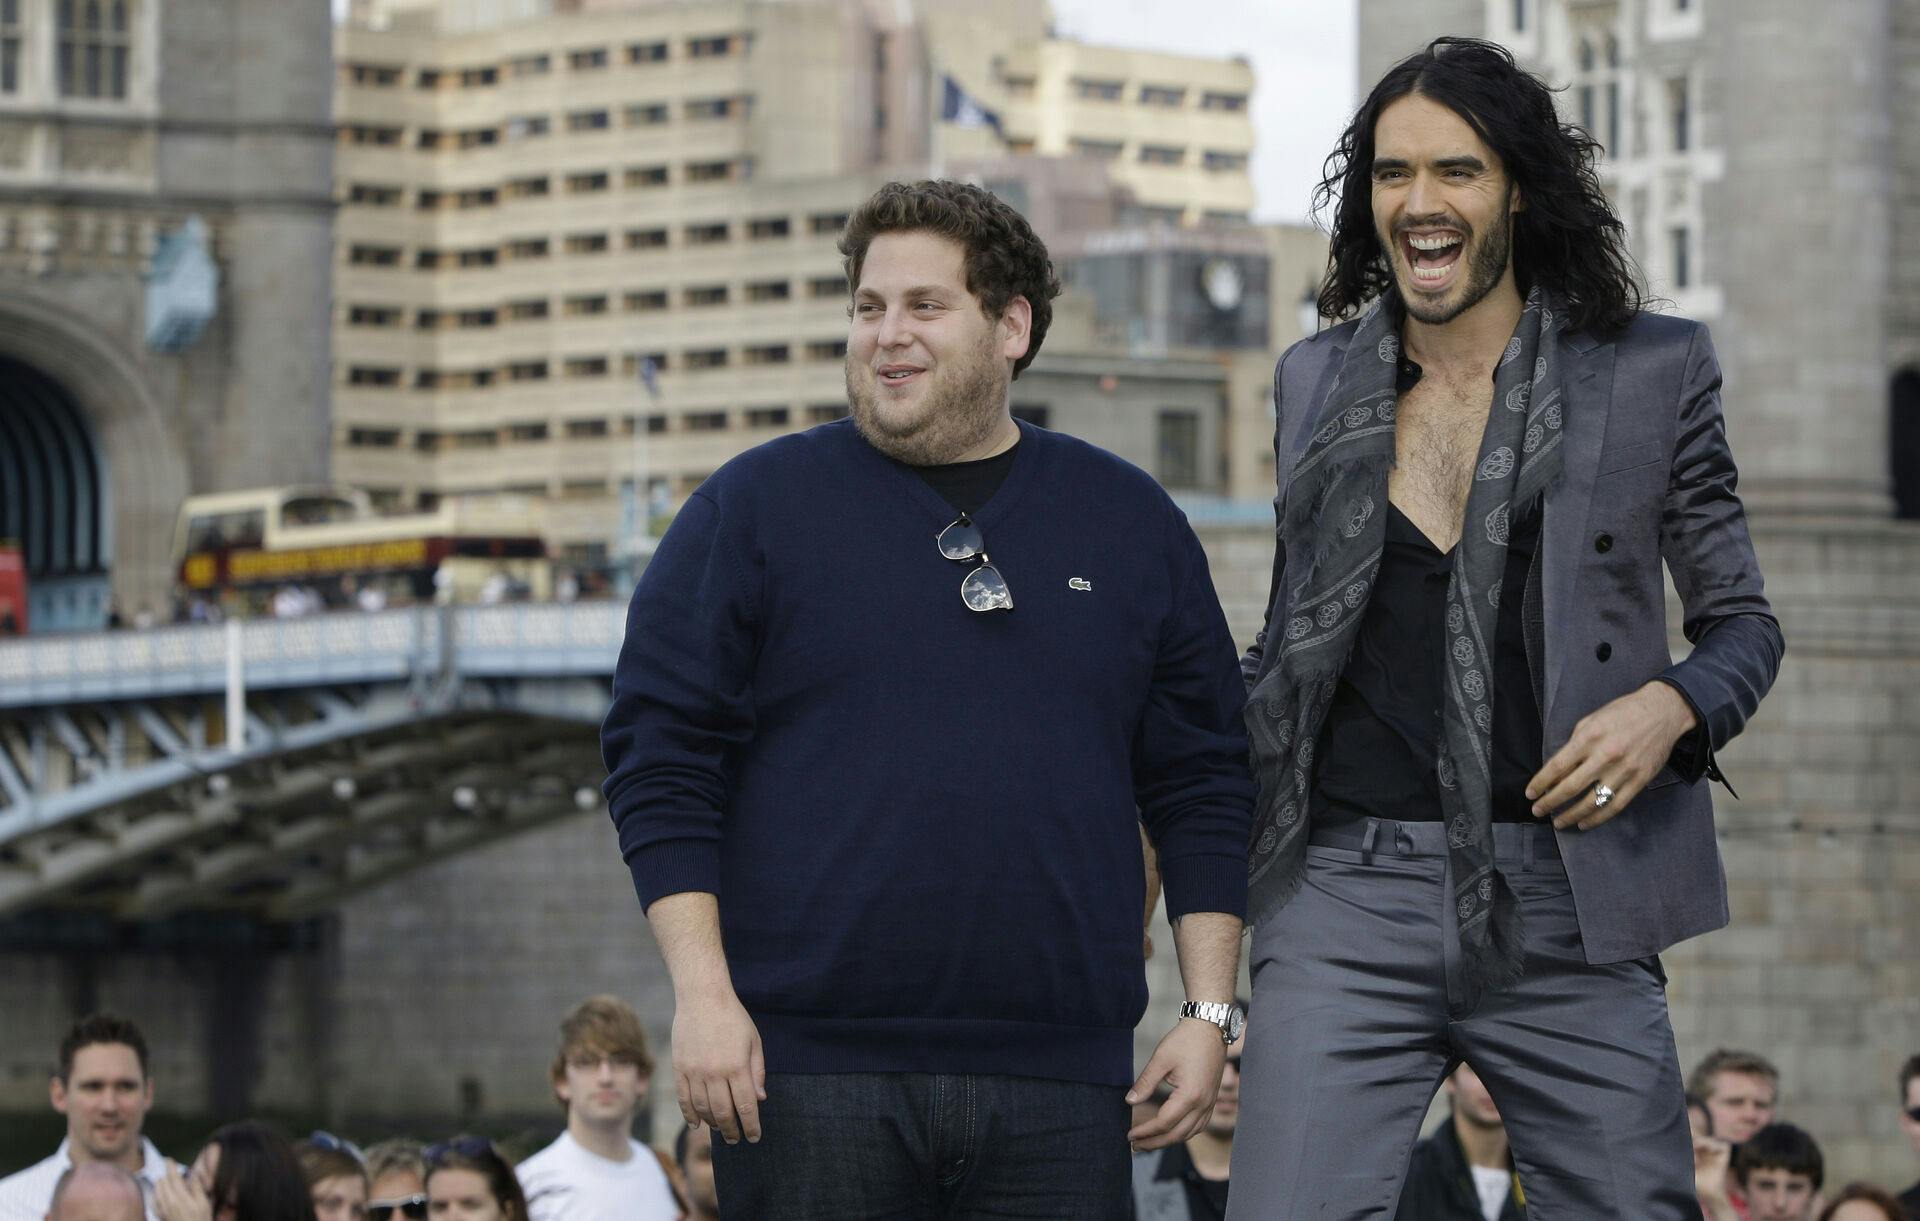 U.S actor Jonah Hill, left, and British actor Russell Brand promote their film Get him to the Greek, by Tower Bridge in central London, Sunday, June 20, 2010. (AP Photo/Joel Ryan)